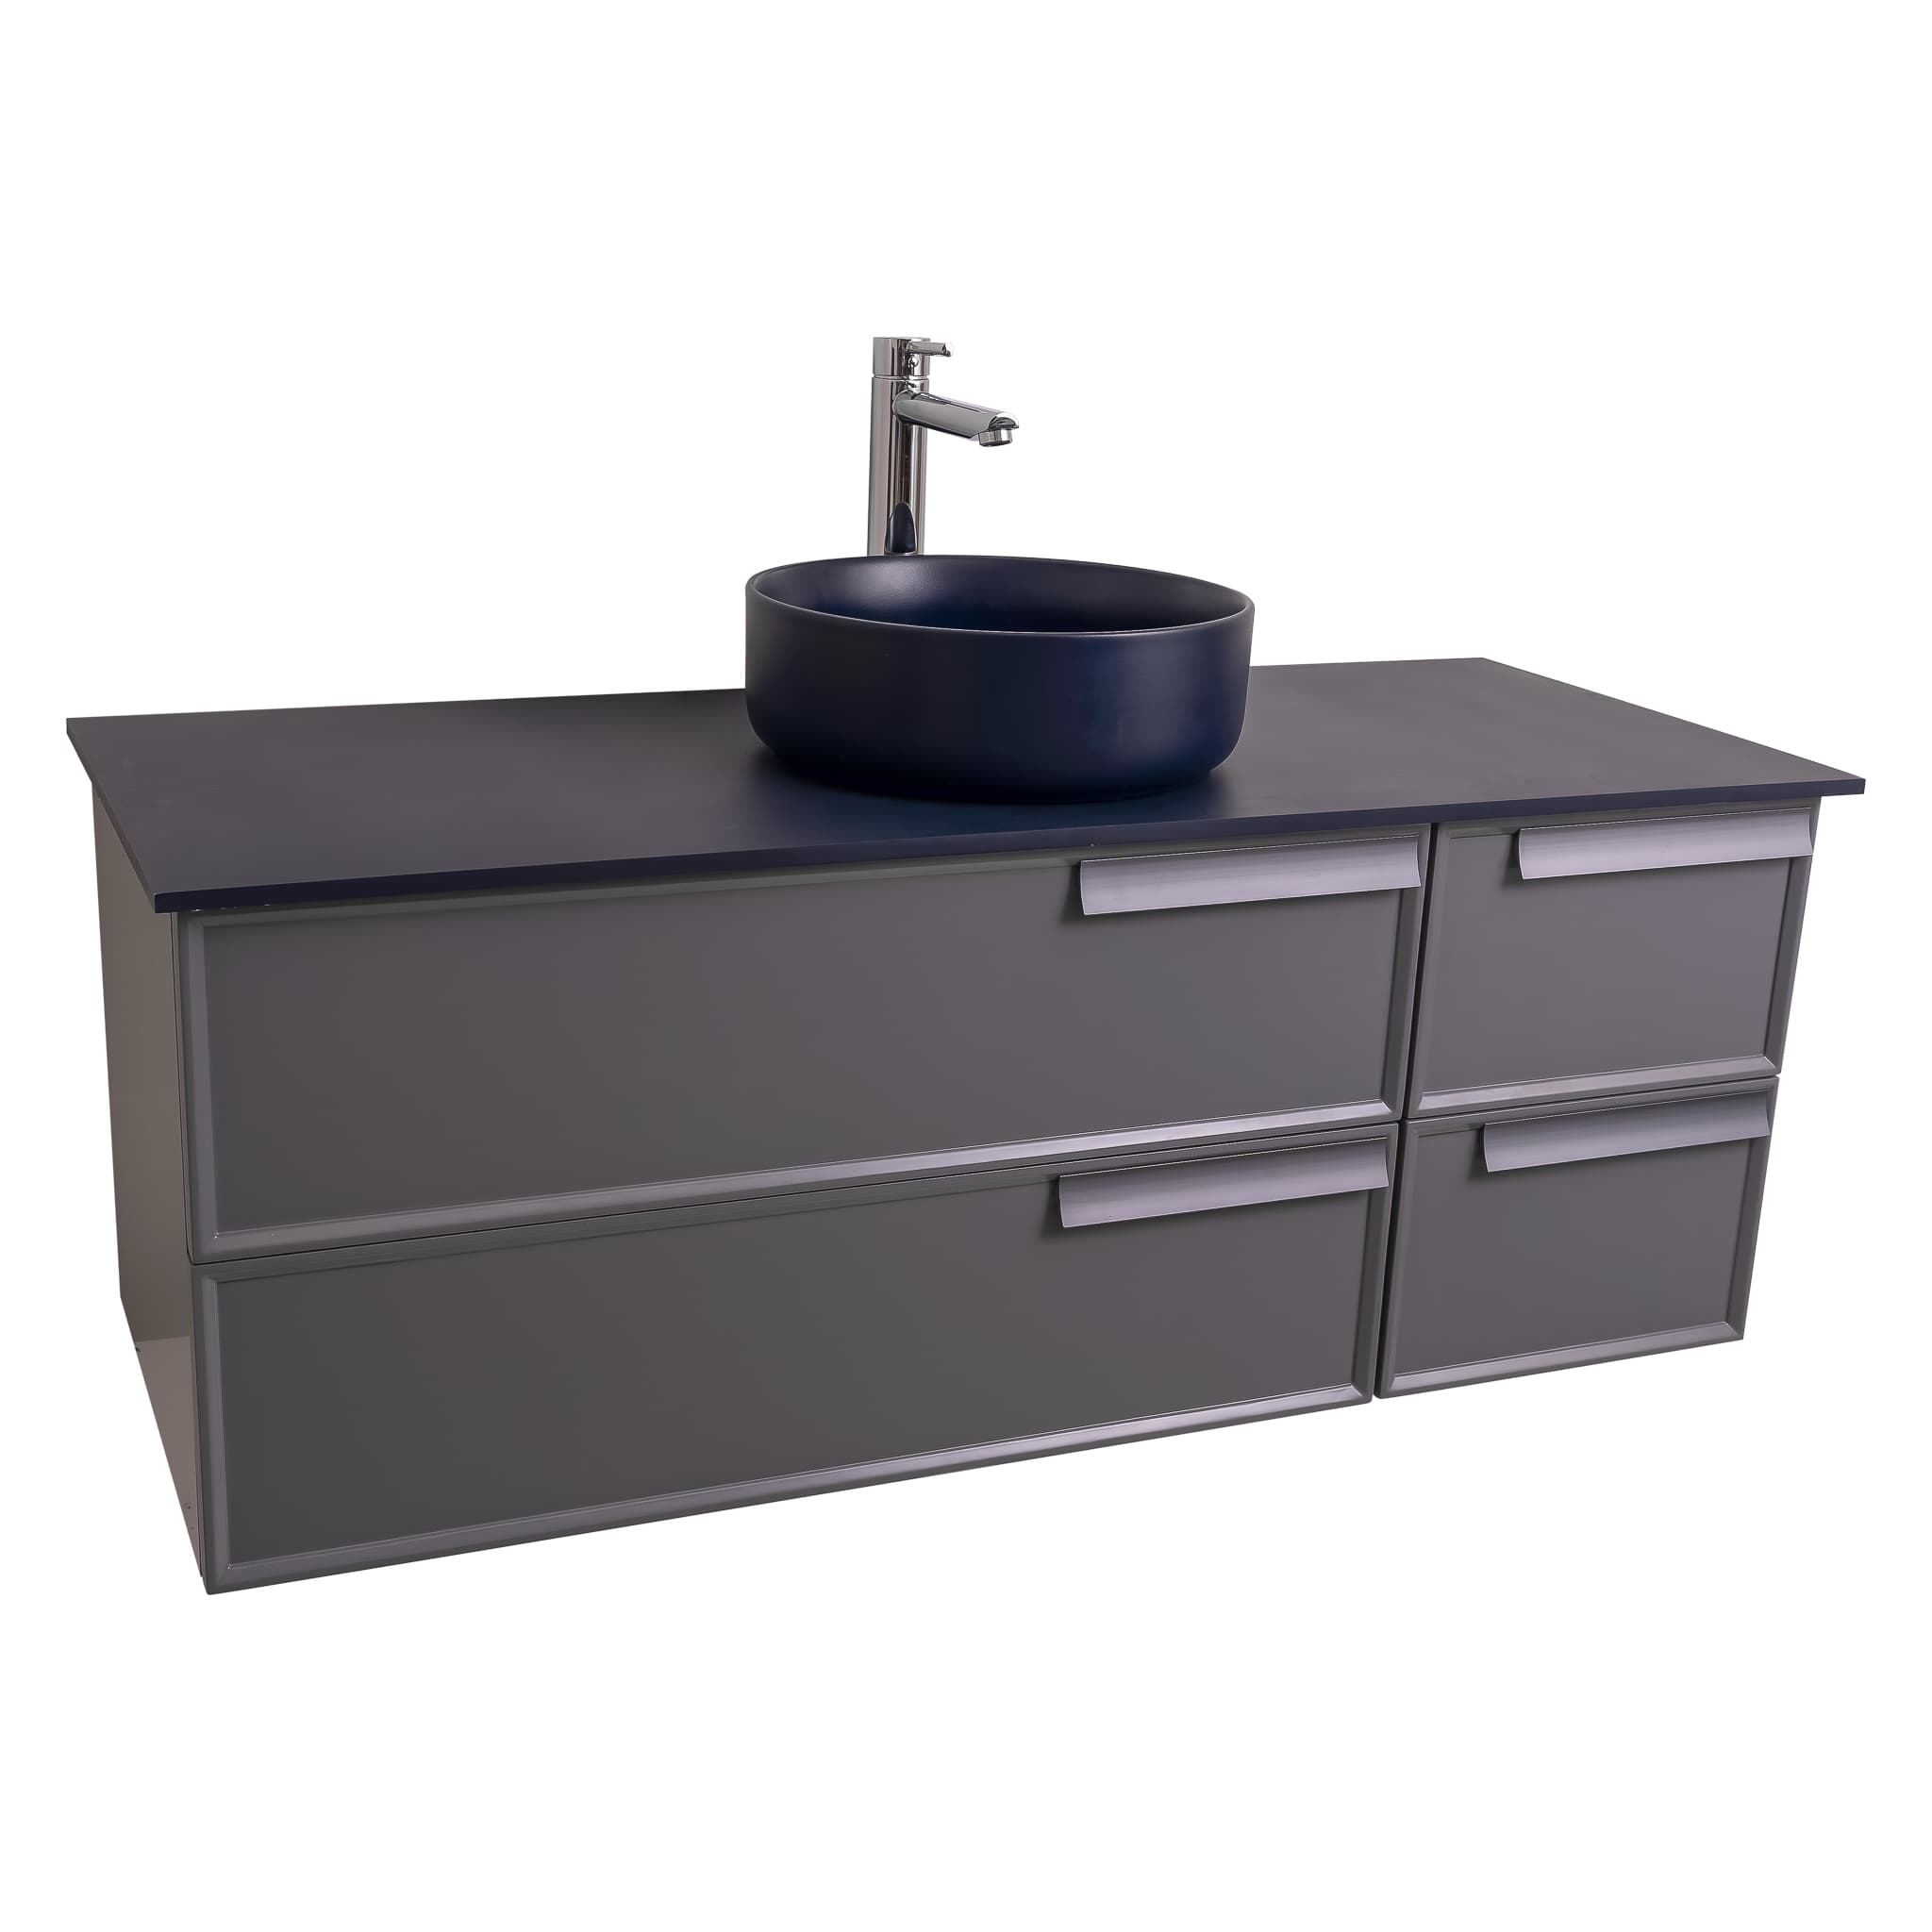 Garda 47.5 Matte Grey Cabinet, Ares Navy Blue Top and Ares Navy Blue Ceramic Basin, Wall Mounted Modern Vanity Set